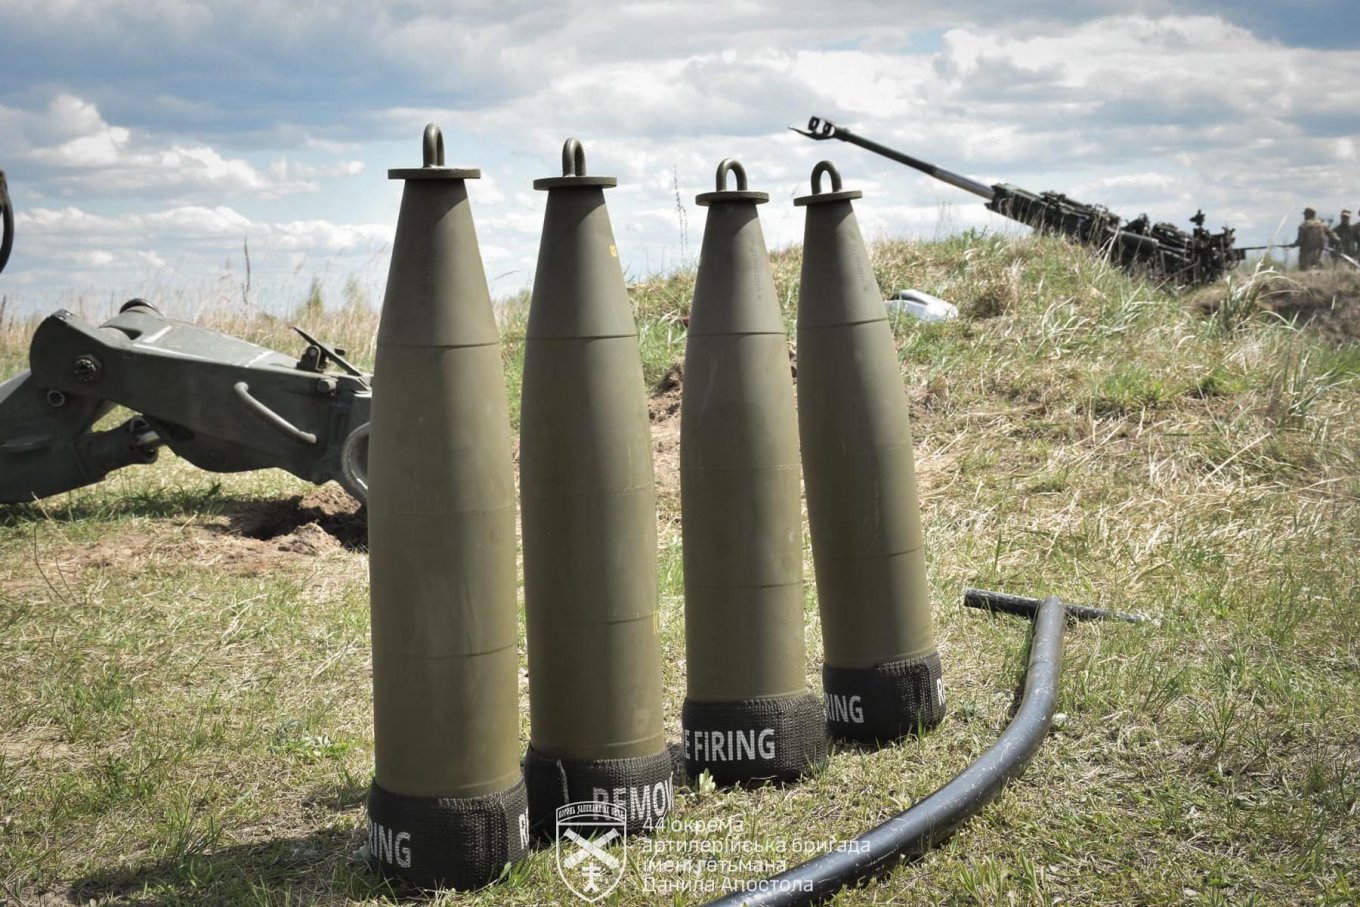 155mm ammunition lined up for firing at russians, Defense Express